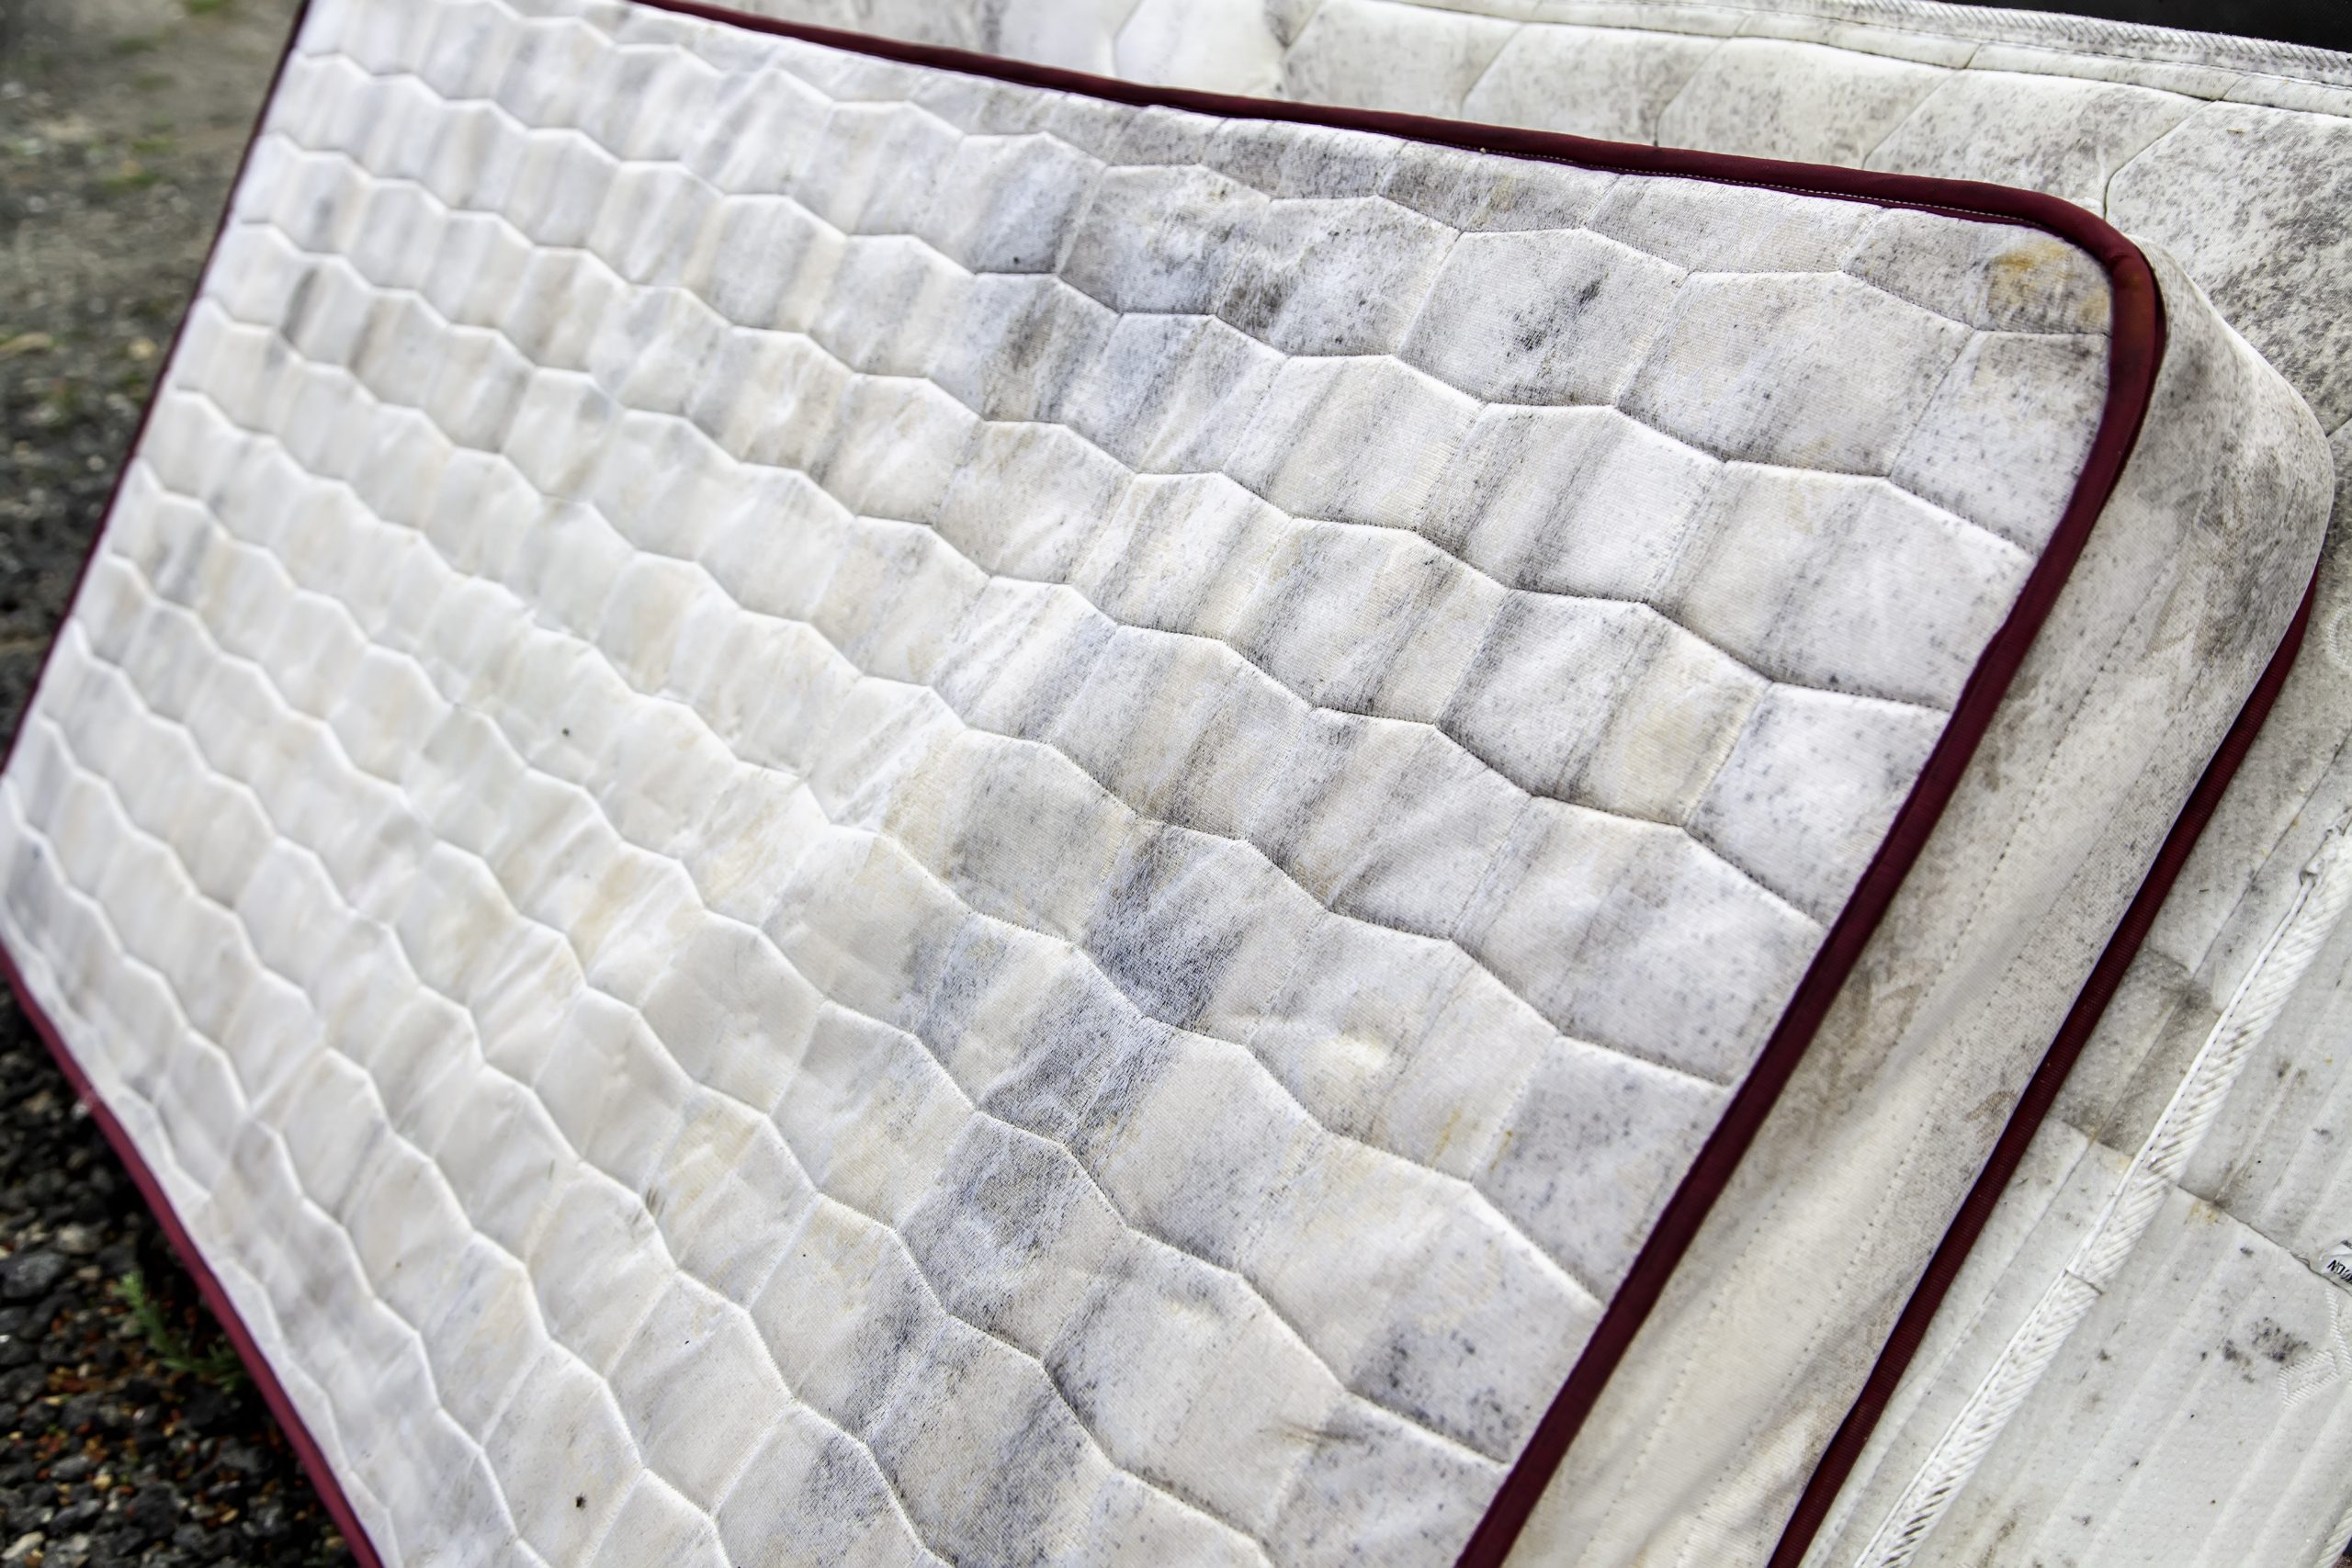 Can you save a mattress that has bed bugs?